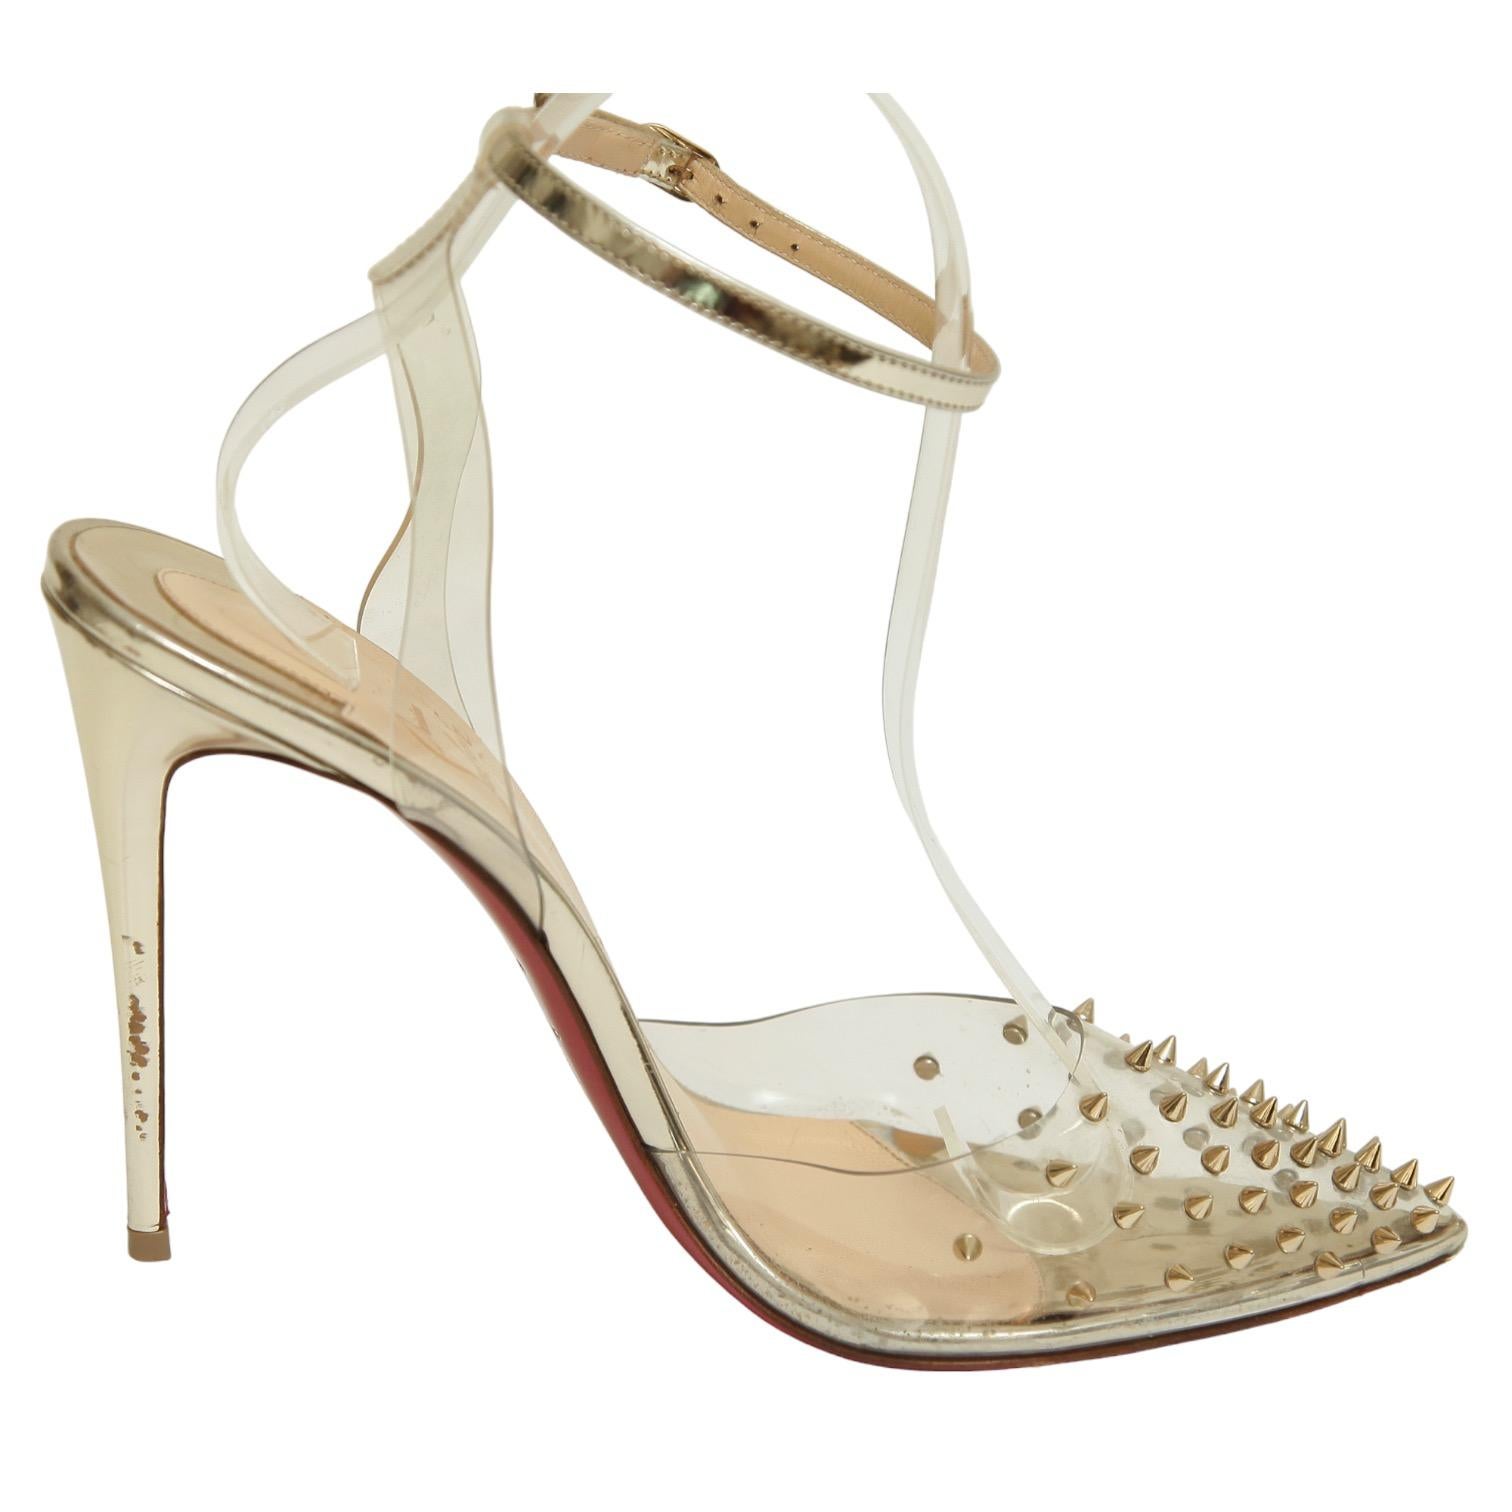 CHRISTIAN LOUBOUTIN SPIKOO METALLIC GOLD SPIKED & PVC PUMPS

Retail excluding sales taxes $995.

Details:
- PVC upper with gold metallic spikes.
- Pointed toe.
- Ankle strap with buckle closure.
- Self covered heels.
- Leather lining and sole.
-